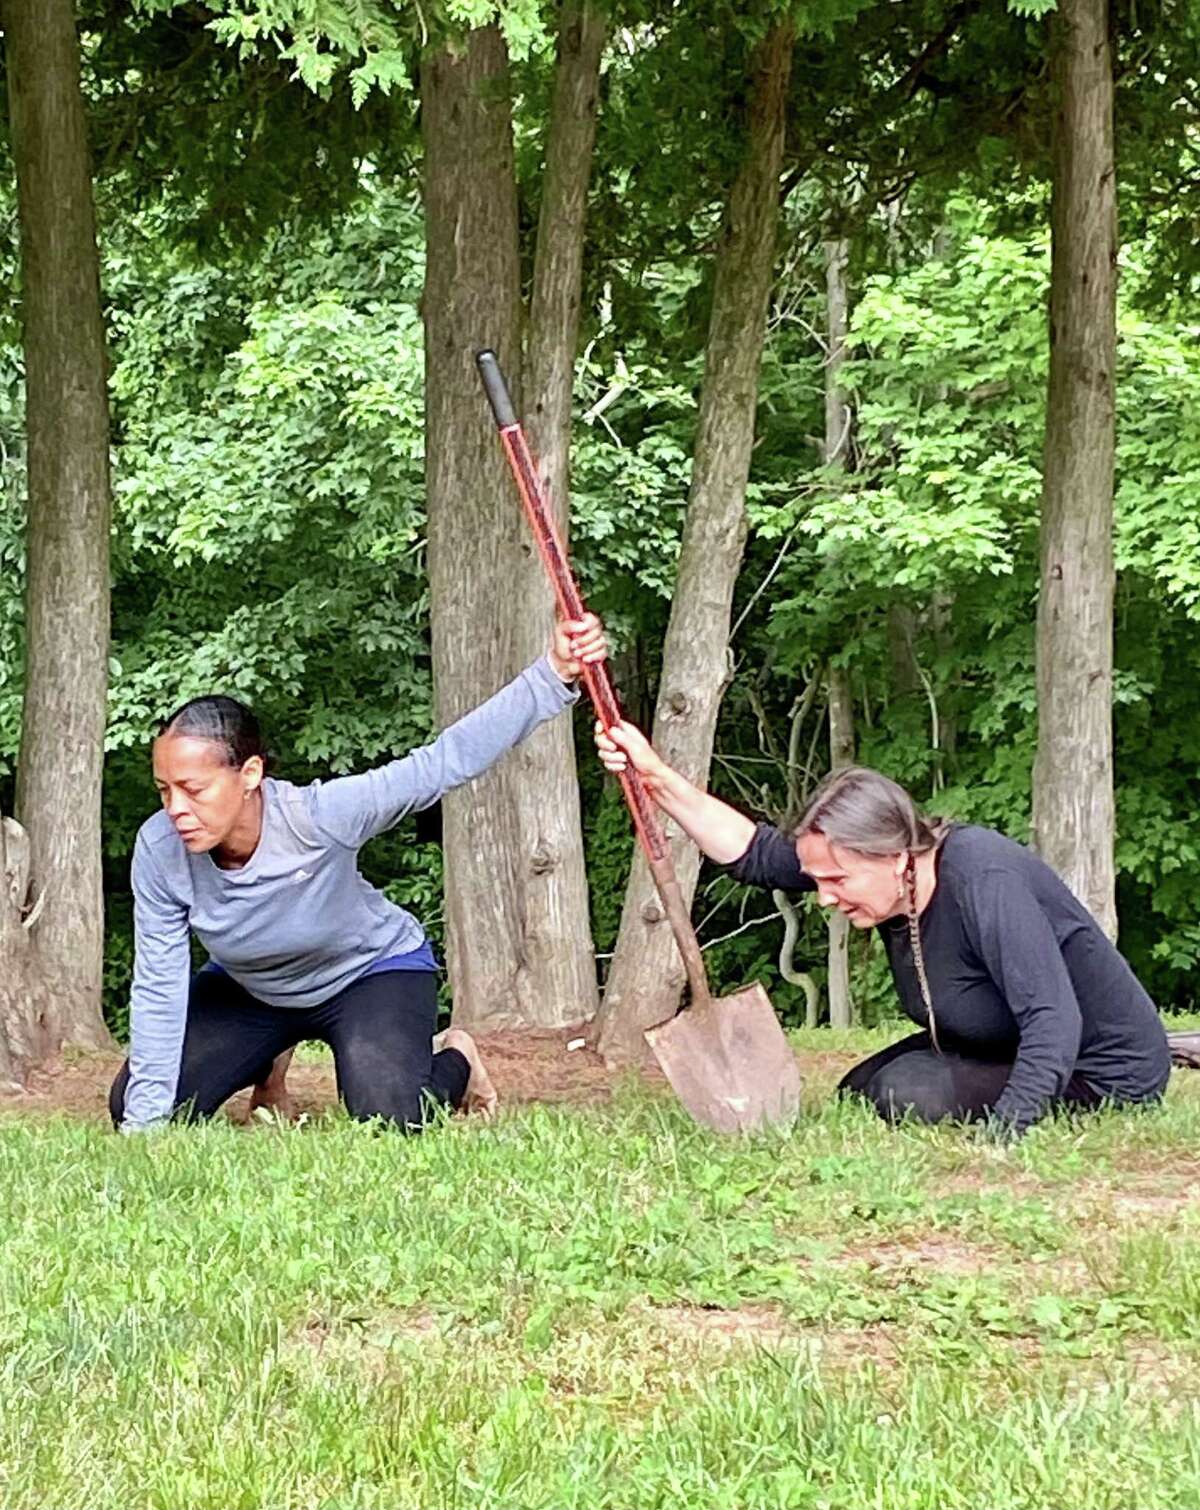 The Middletown-based theater company ARTFARM presents “Where Are We Now?: A Performative Grief & Healing Ritual to Tend Our Racial Wounds” at 6 p.m., June 25 - 27 outdoors on the campus of Middlesex Community College.